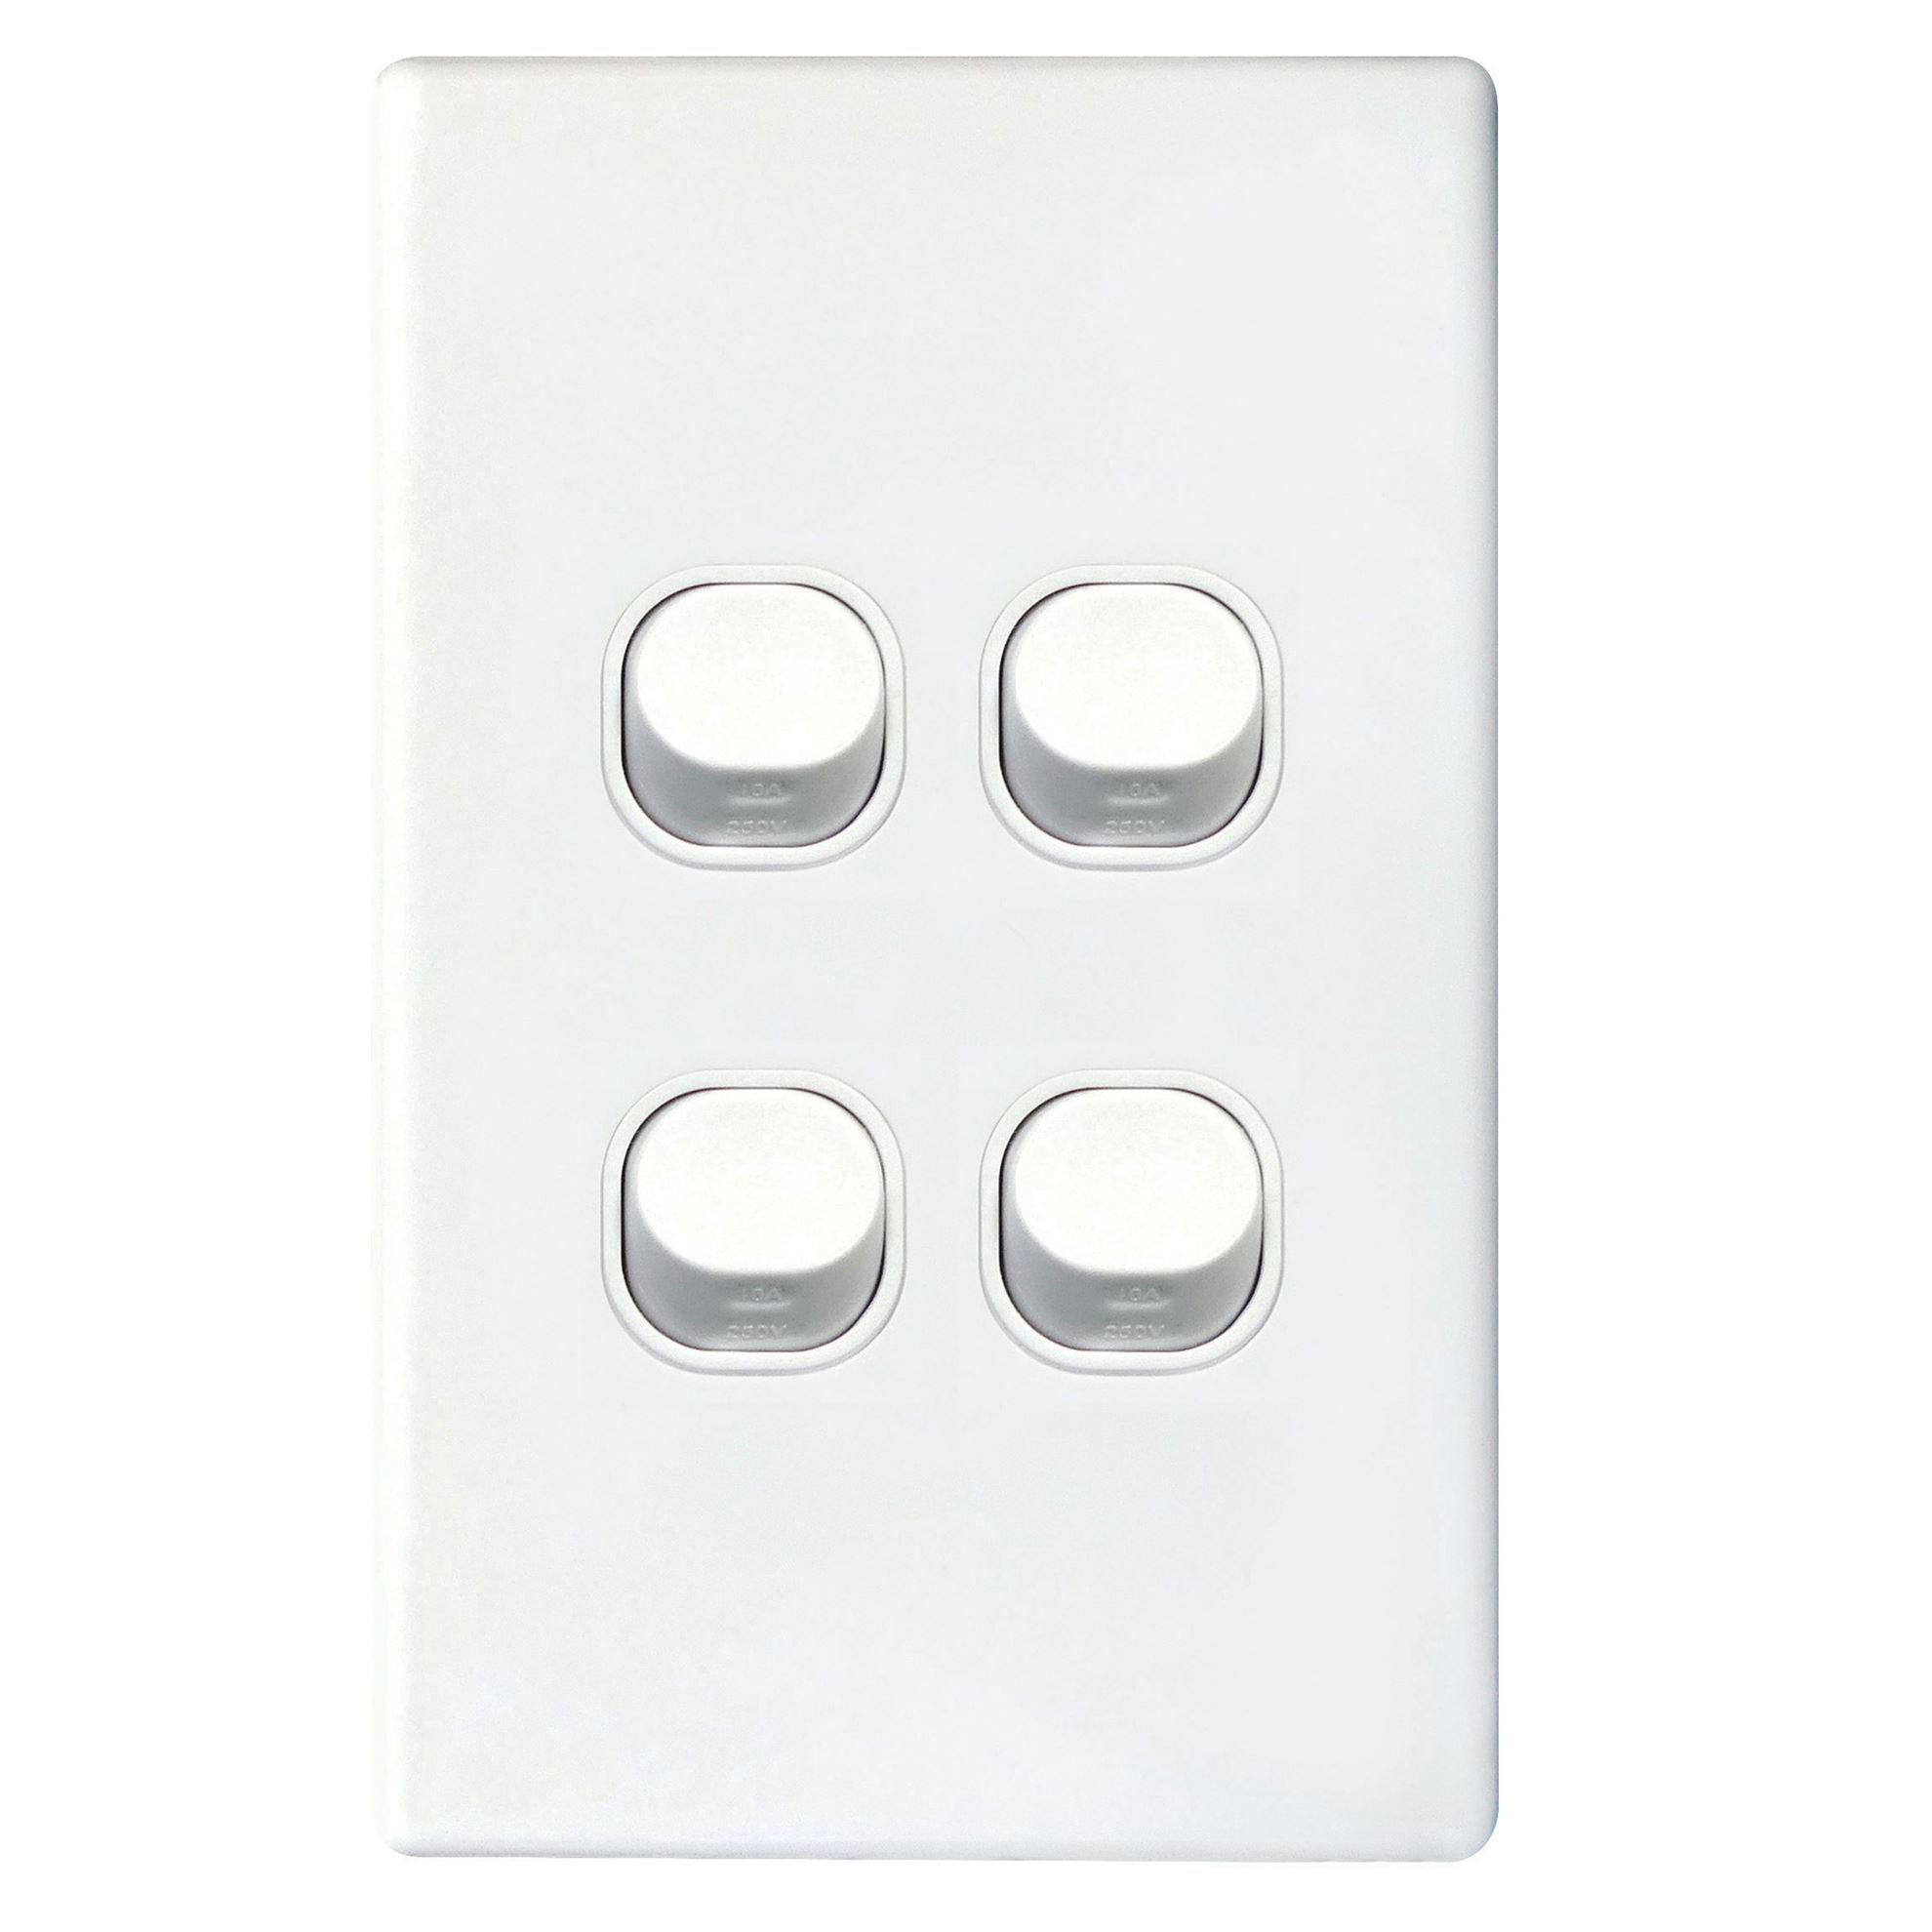 4Gang 16Amp Wall Switch - White